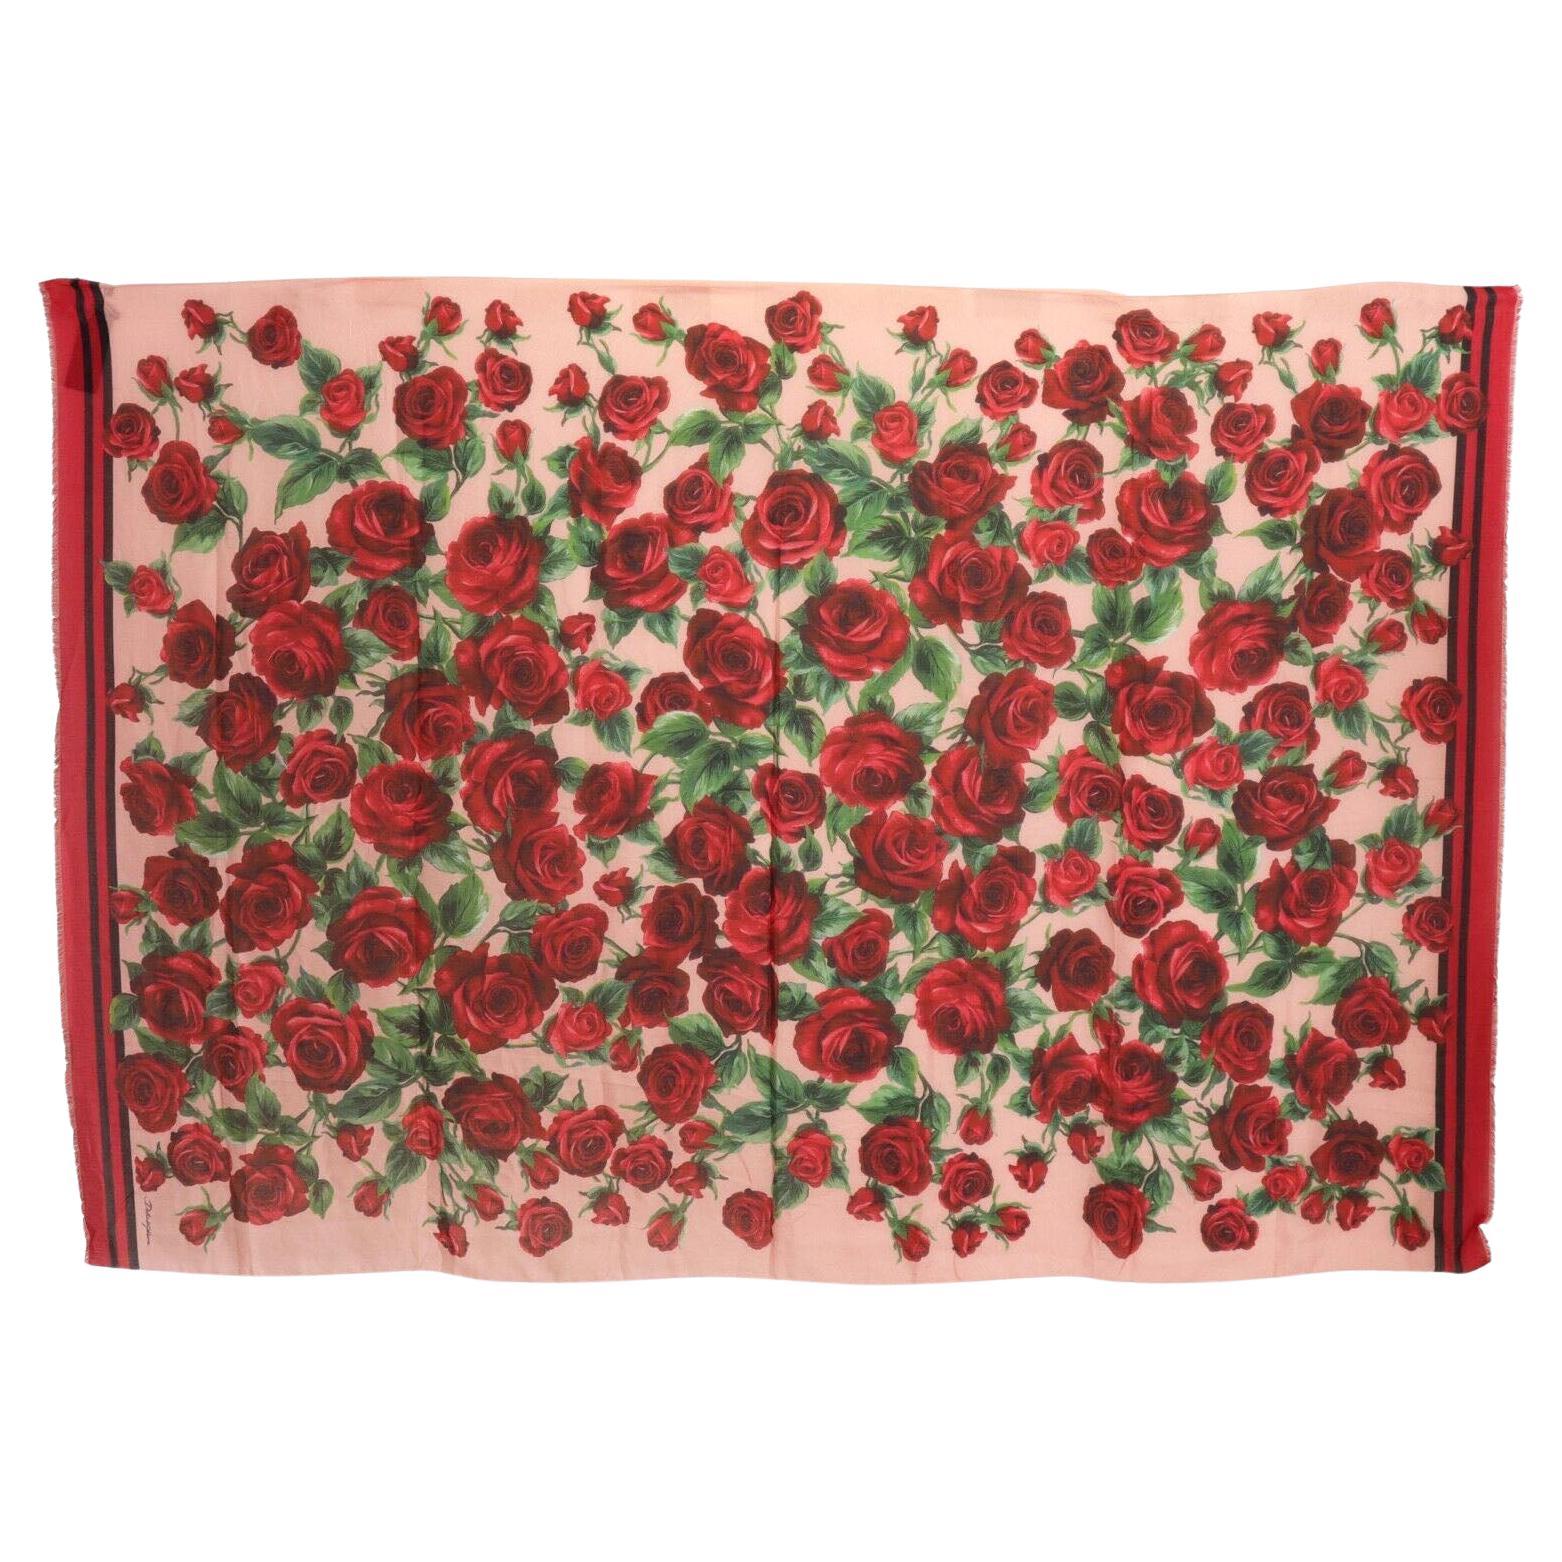 Dolce & Gabbana Red Modal Cashmere Roses Floral Scarf Wrap Cover Up Italy DG For Sale